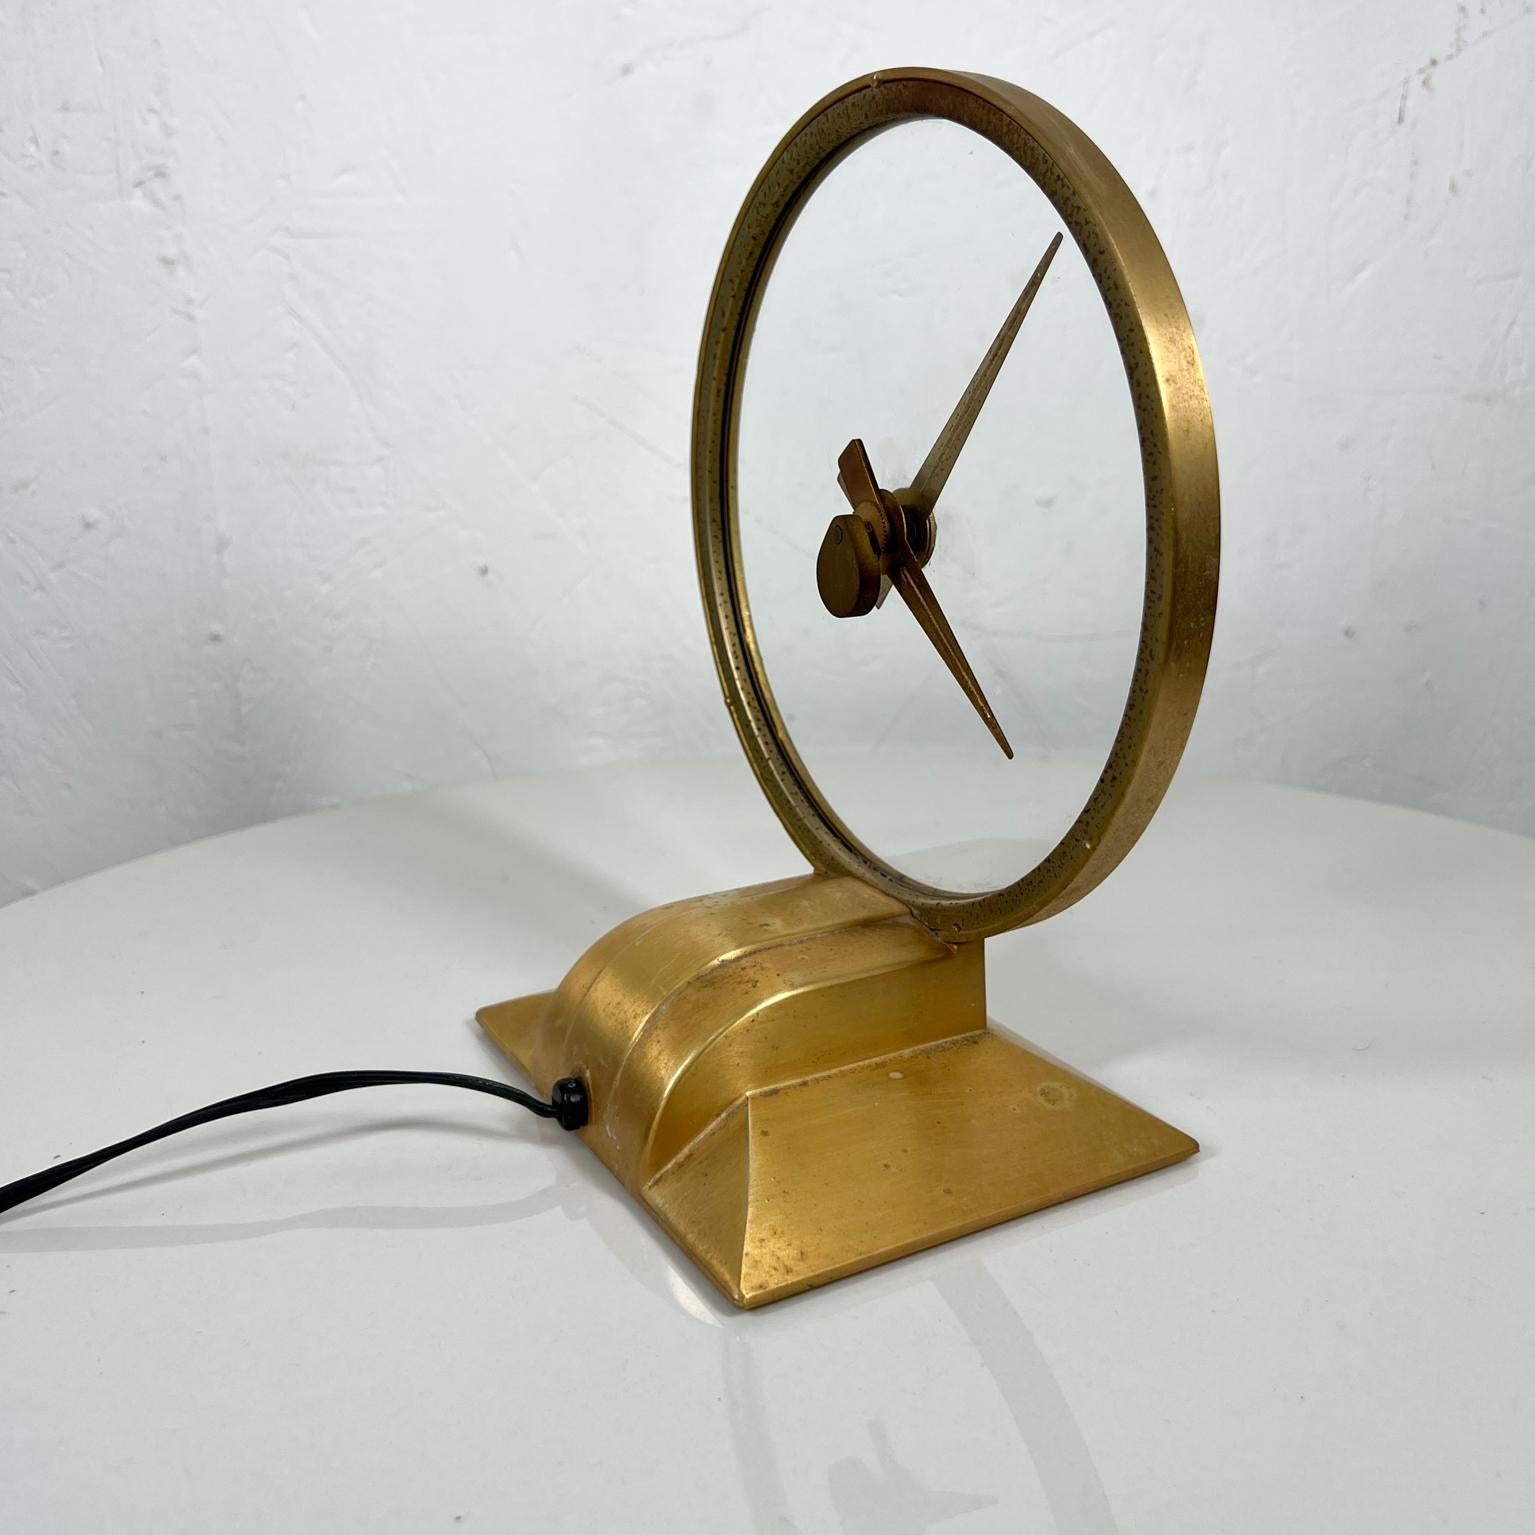 Brass 1950s Golden Hour Electric Clock made by Jefferson Electric Bellwood, Illinois